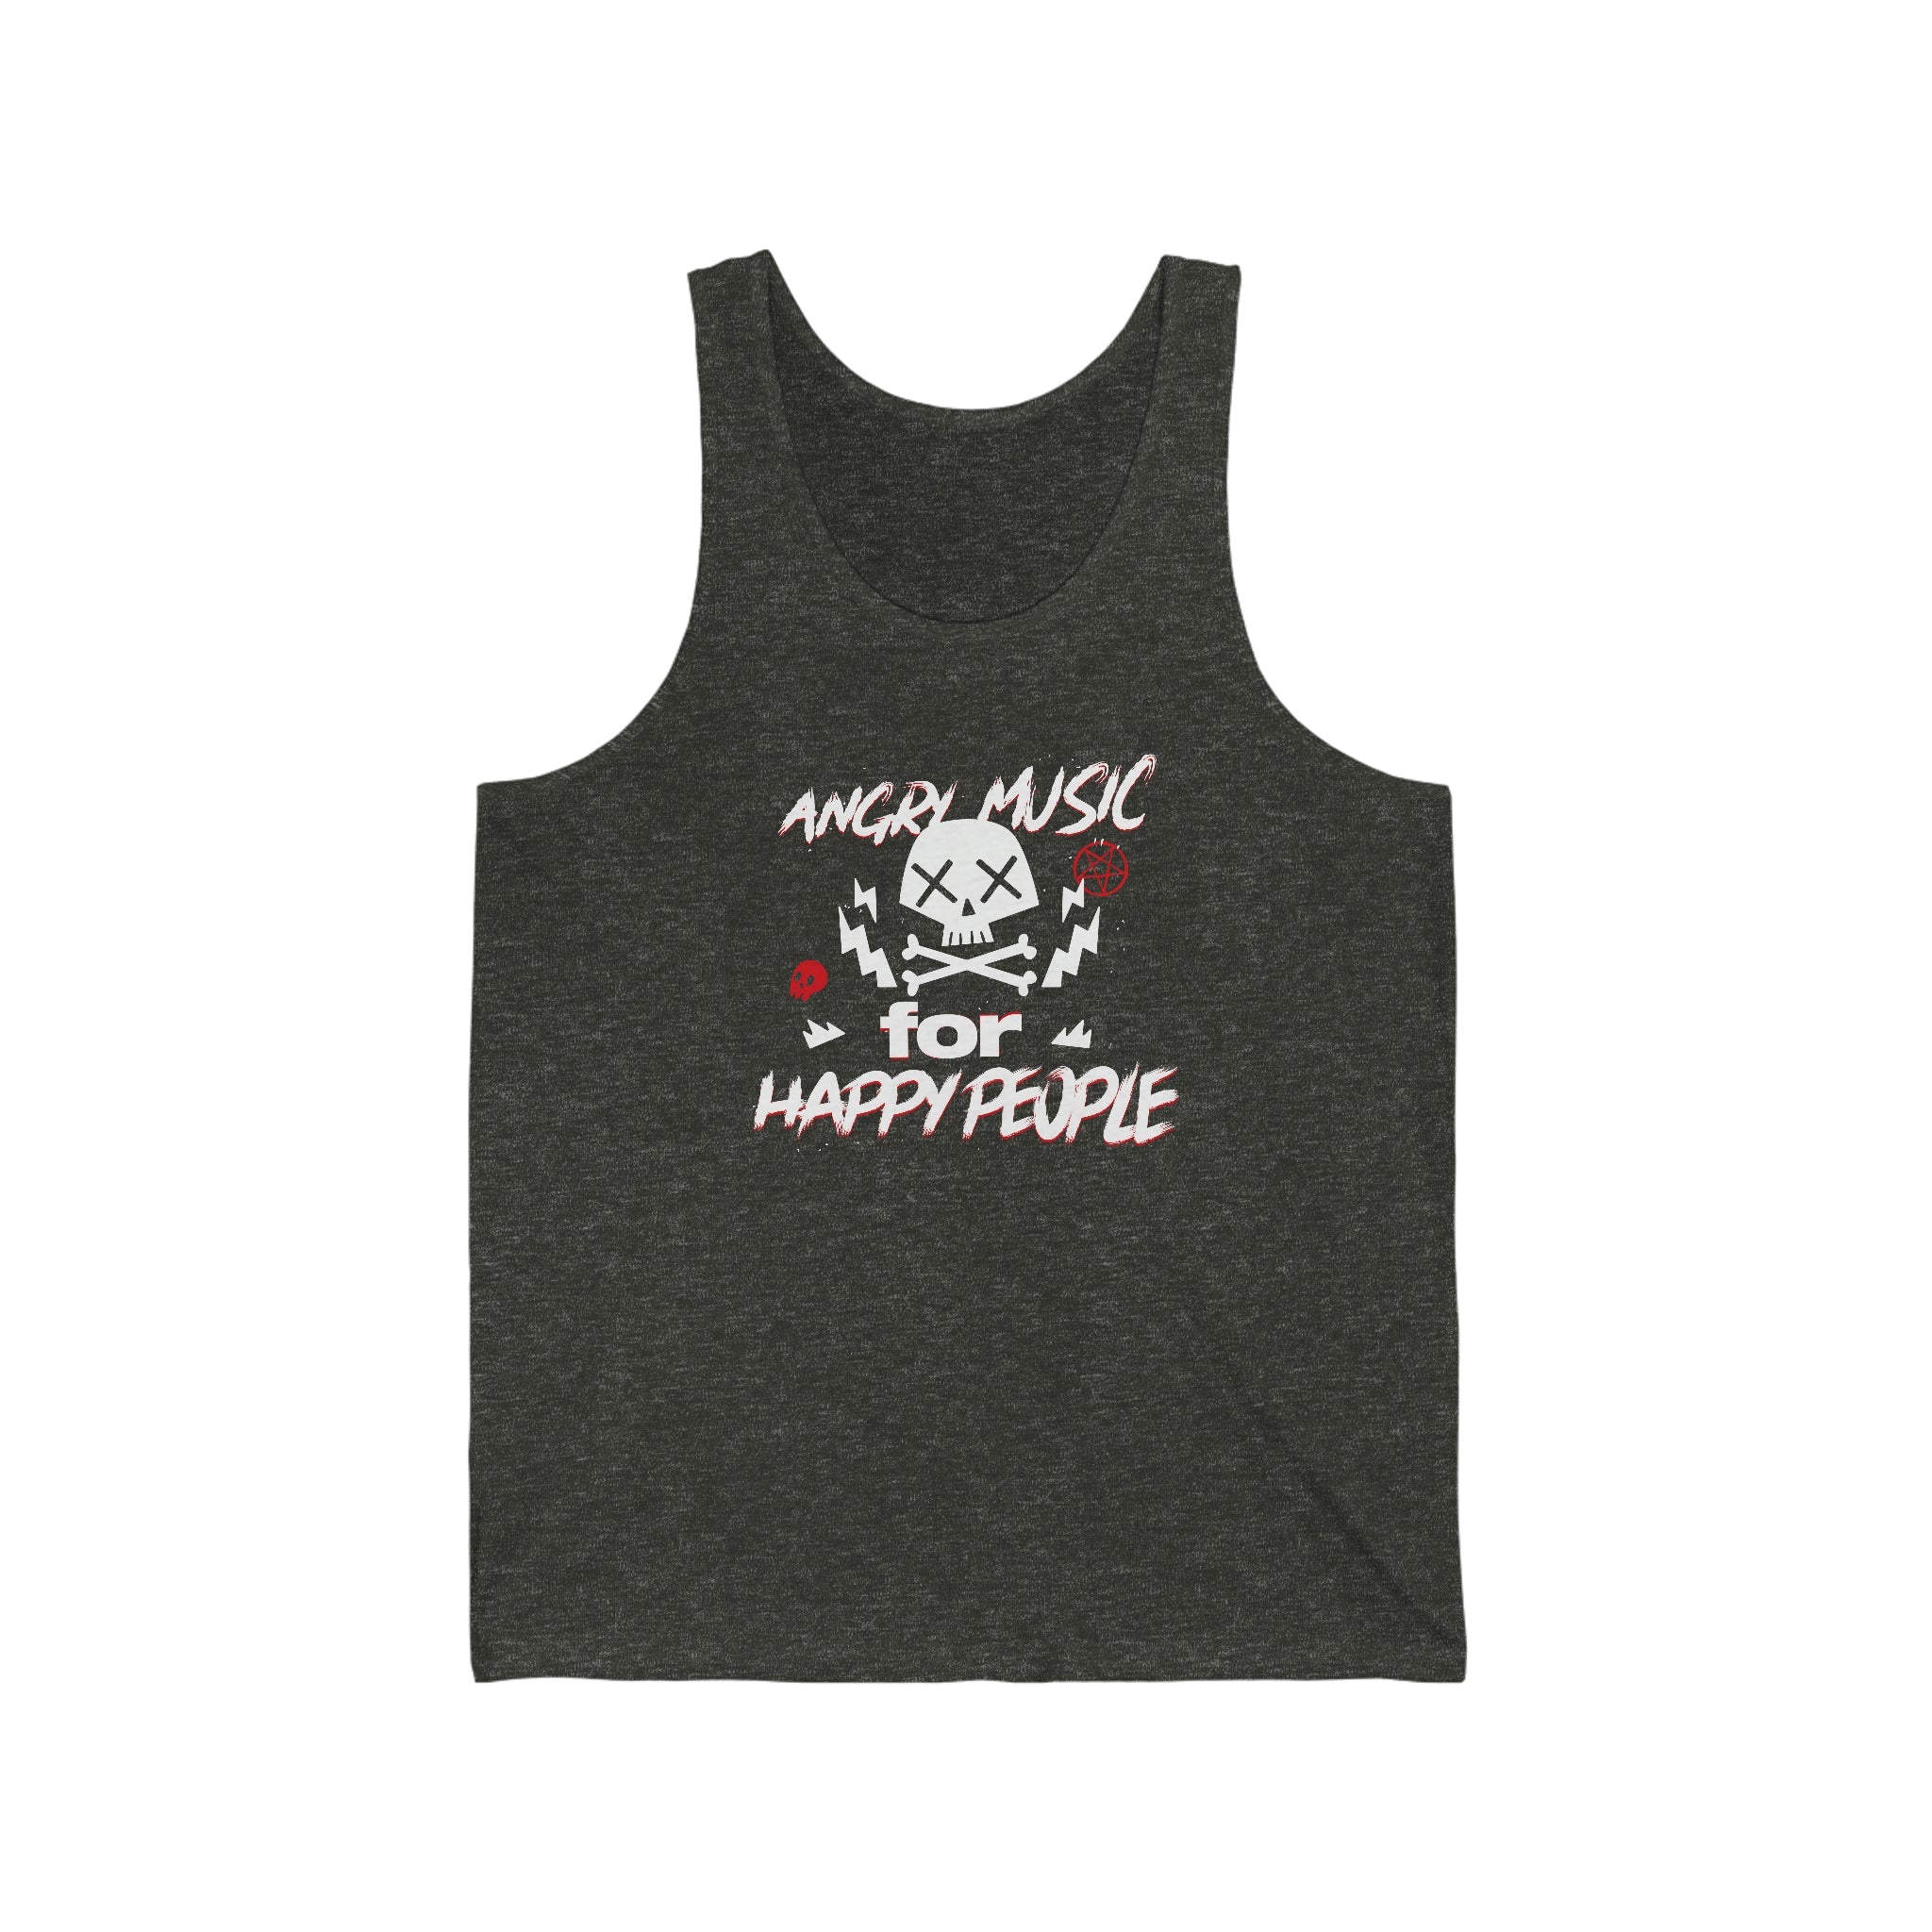 Angry Music for Happy People : Unisex 100% Cotton Tank